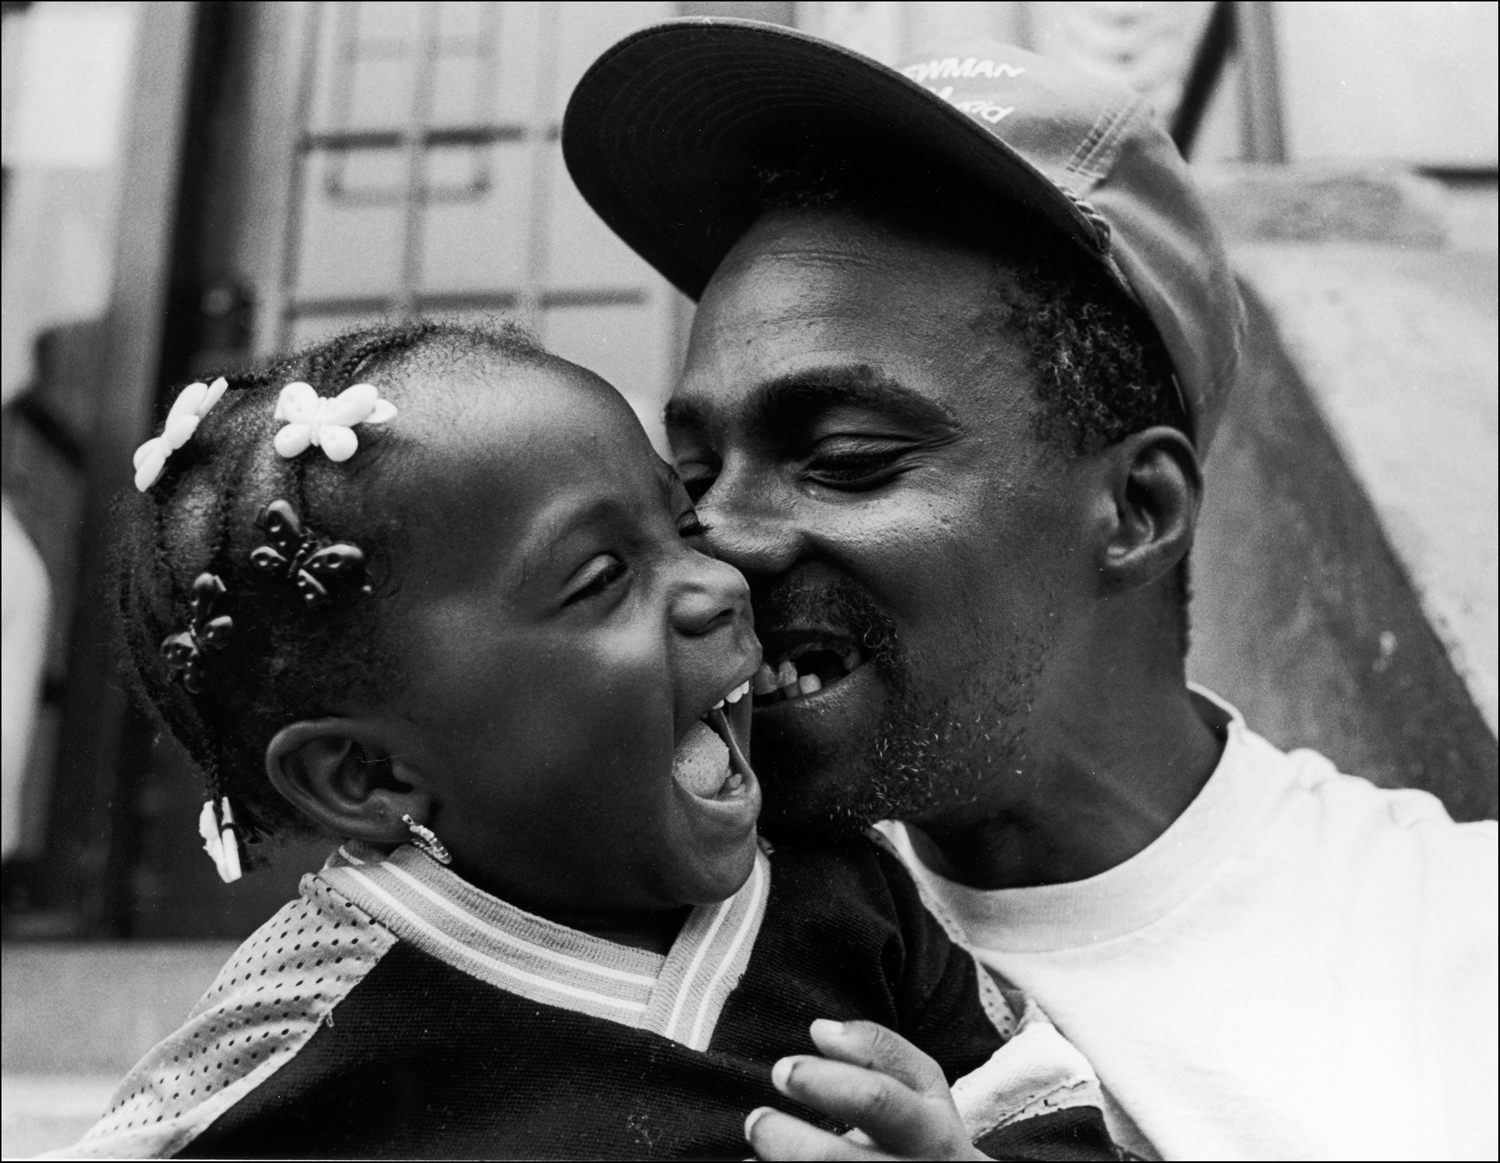 Father and daughter : Carmel Hill Harlem NYC 1995-2000 : BILL FOLEY 